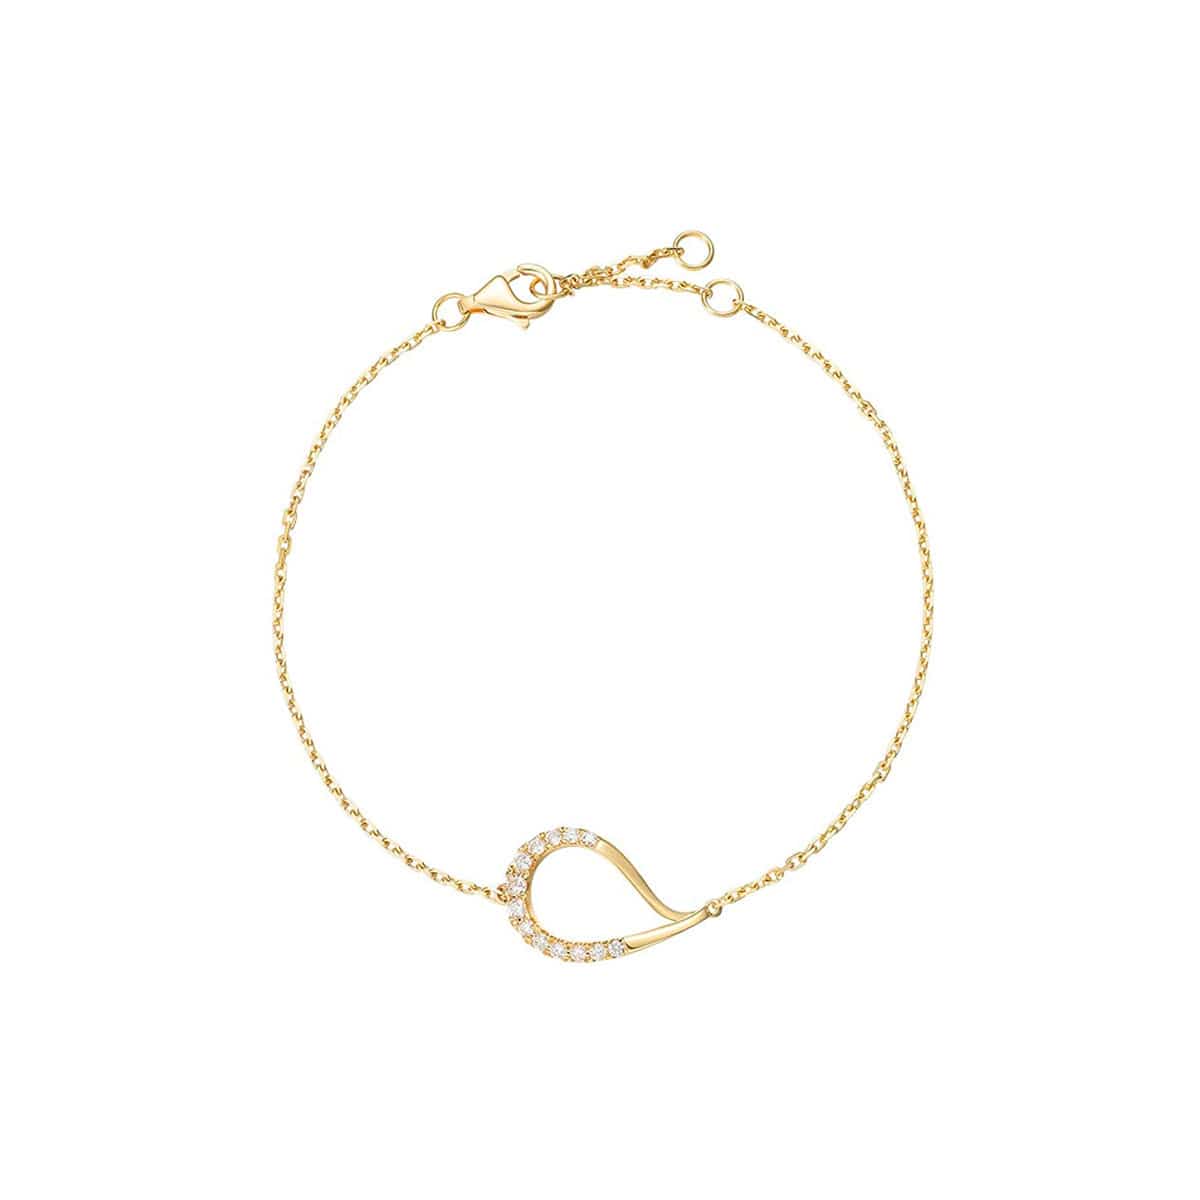 FANCIME "Sweet Dewdrop" Simple Thin 18K Solid Yellow Gold Bracelet Main